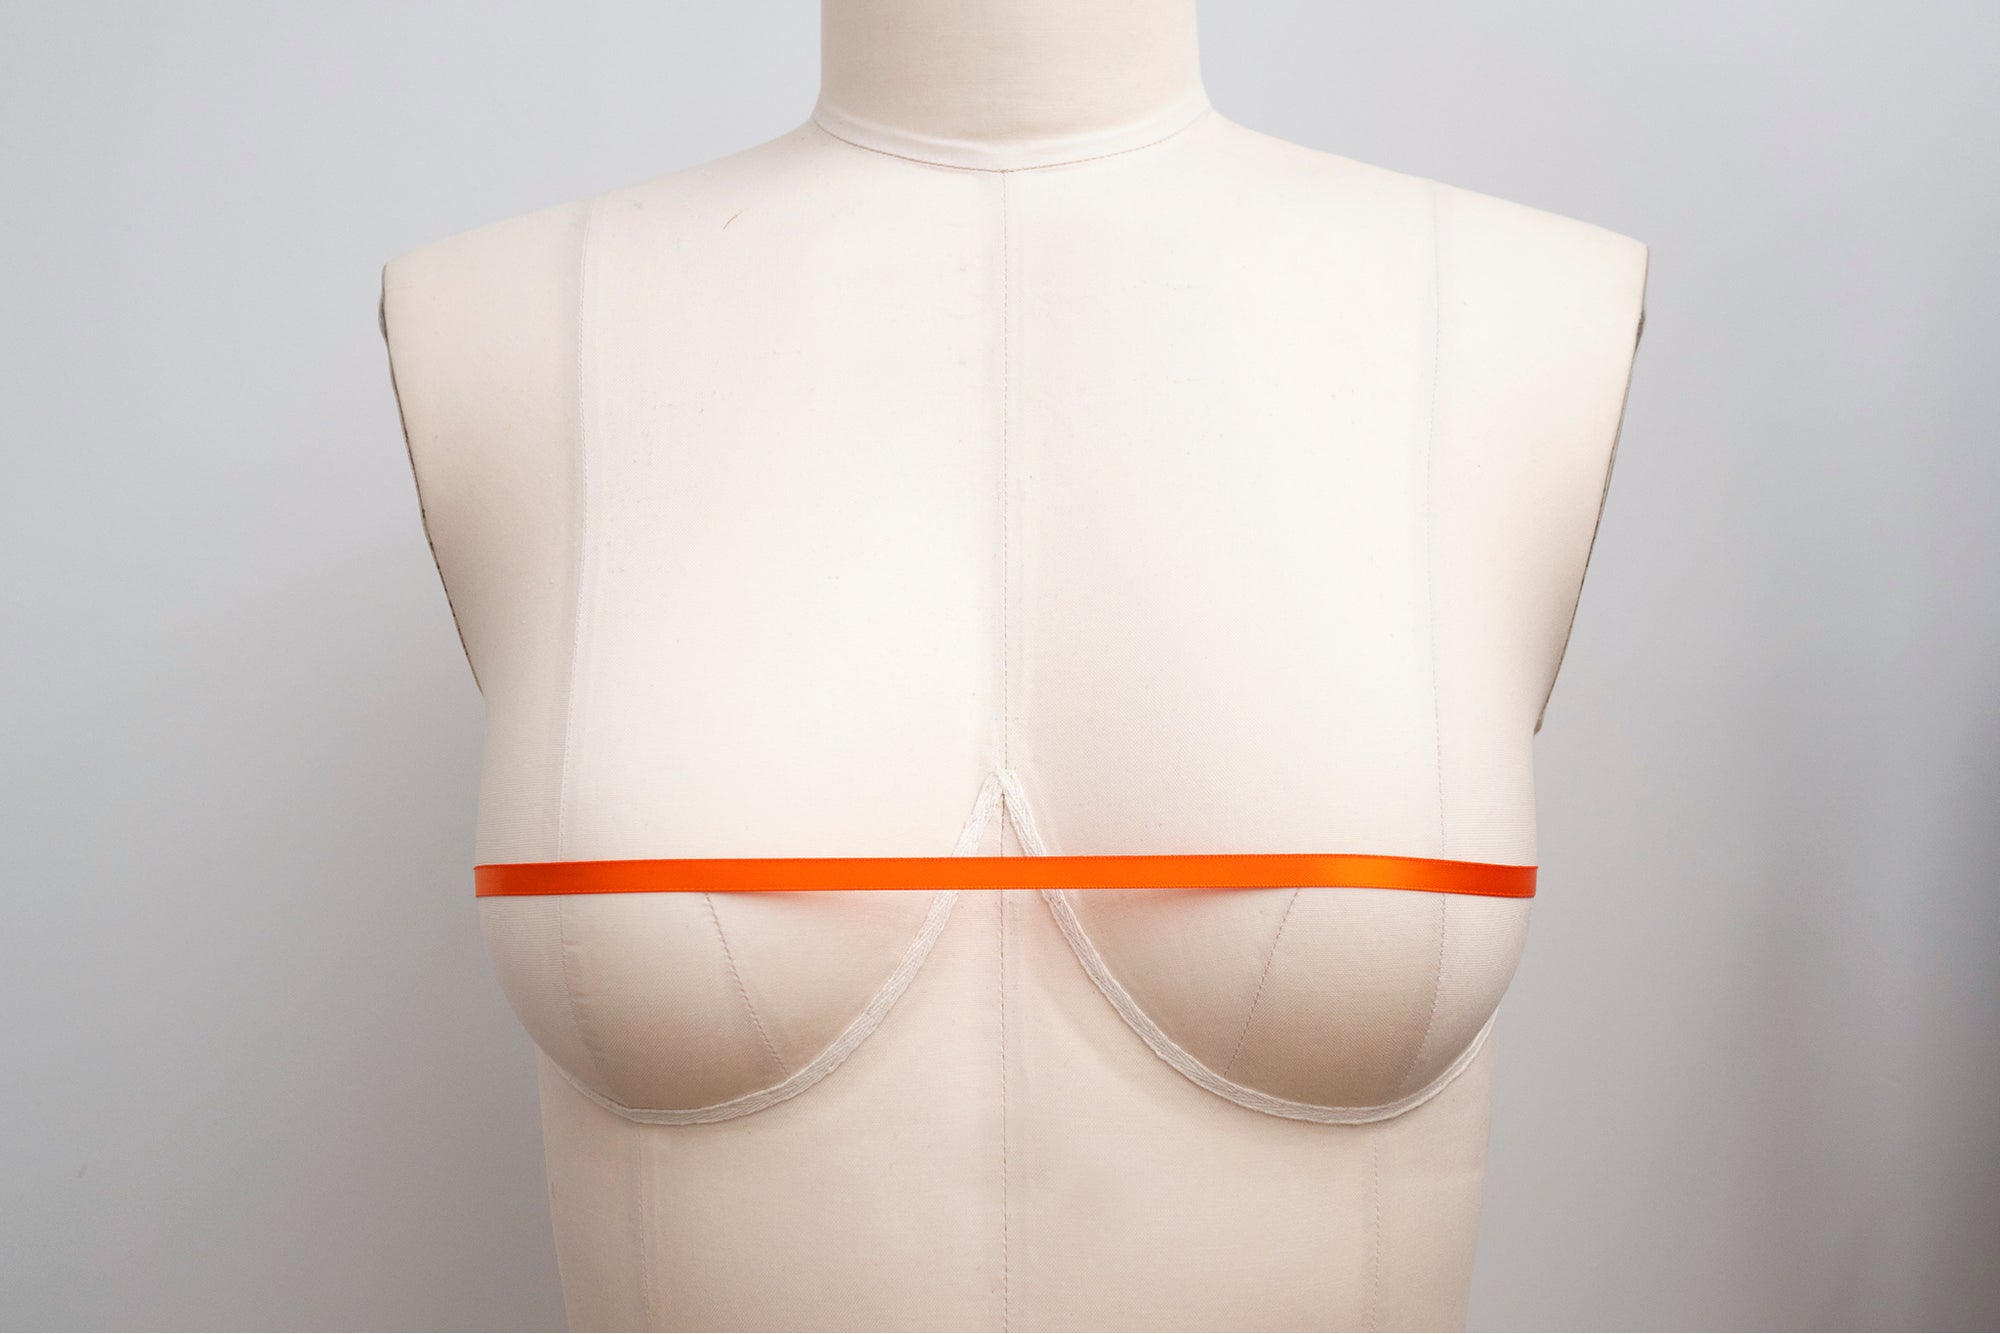 New AI Bra-Fitting Technology Means You Can Measure Your Bra Size From Home